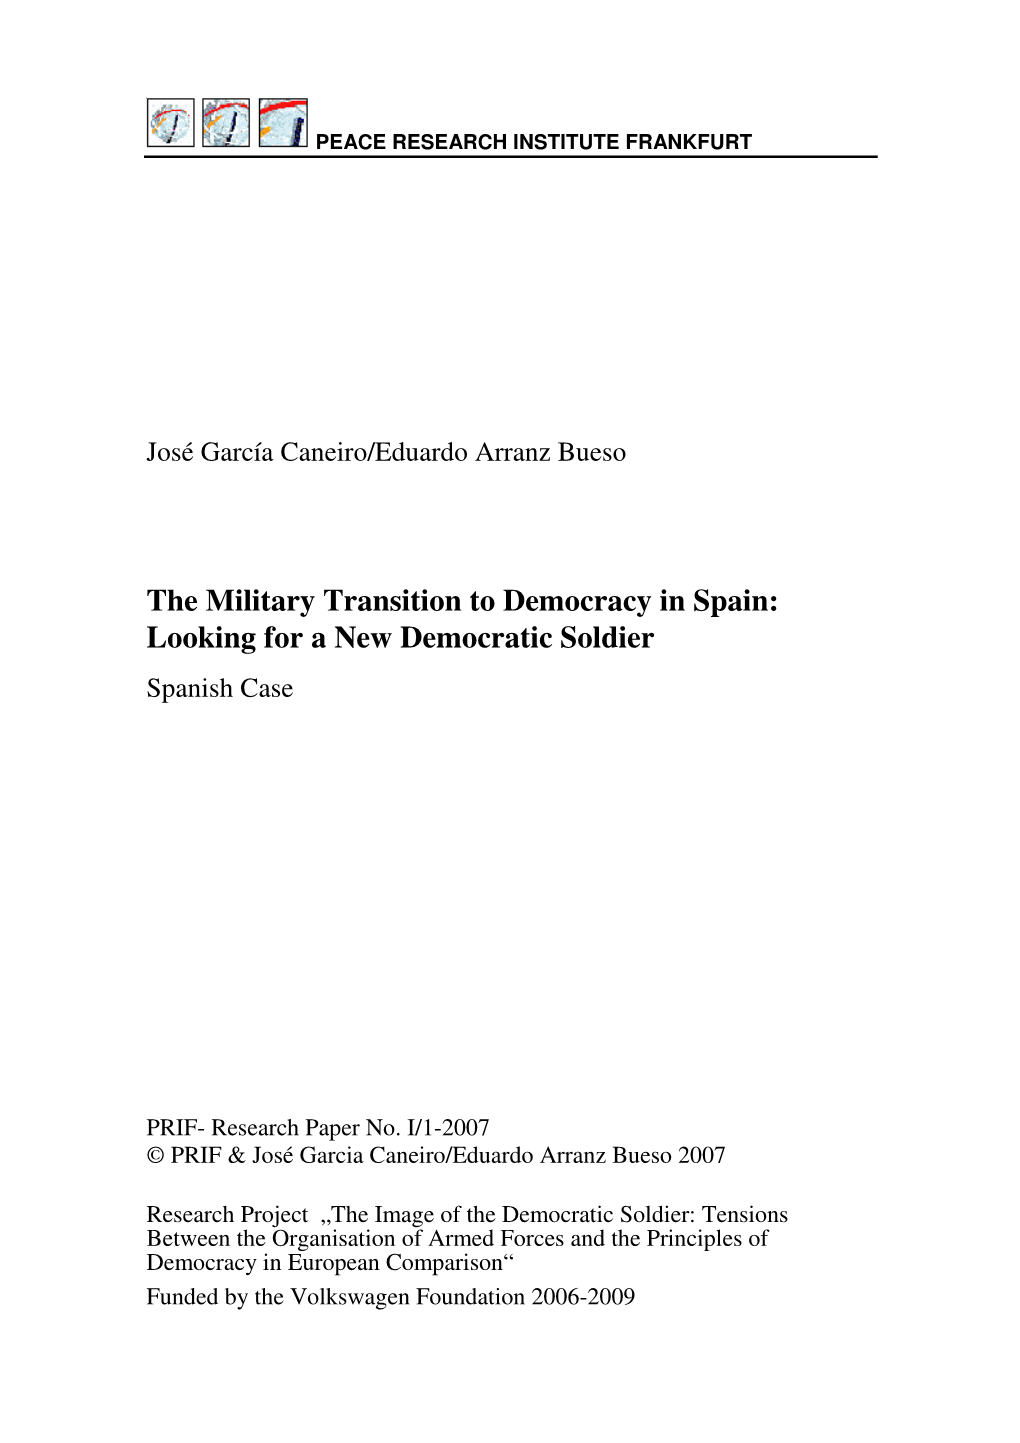 The Military Transition to Democracy in Spain: Looking for a New Democratic Soldier Spanish Case